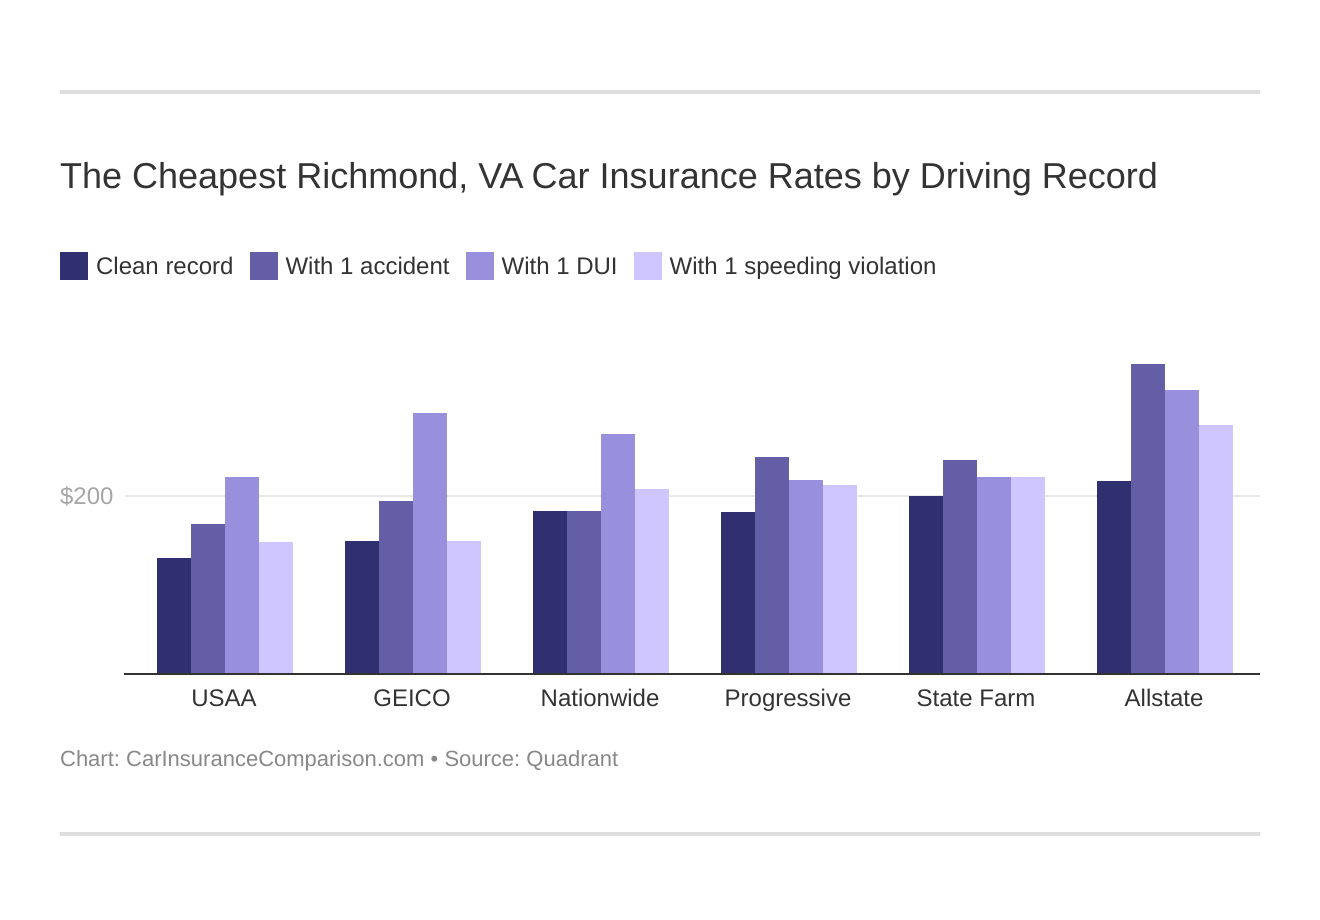 The Cheapest Richmond, VA Car Insurance Rates by Driving Record